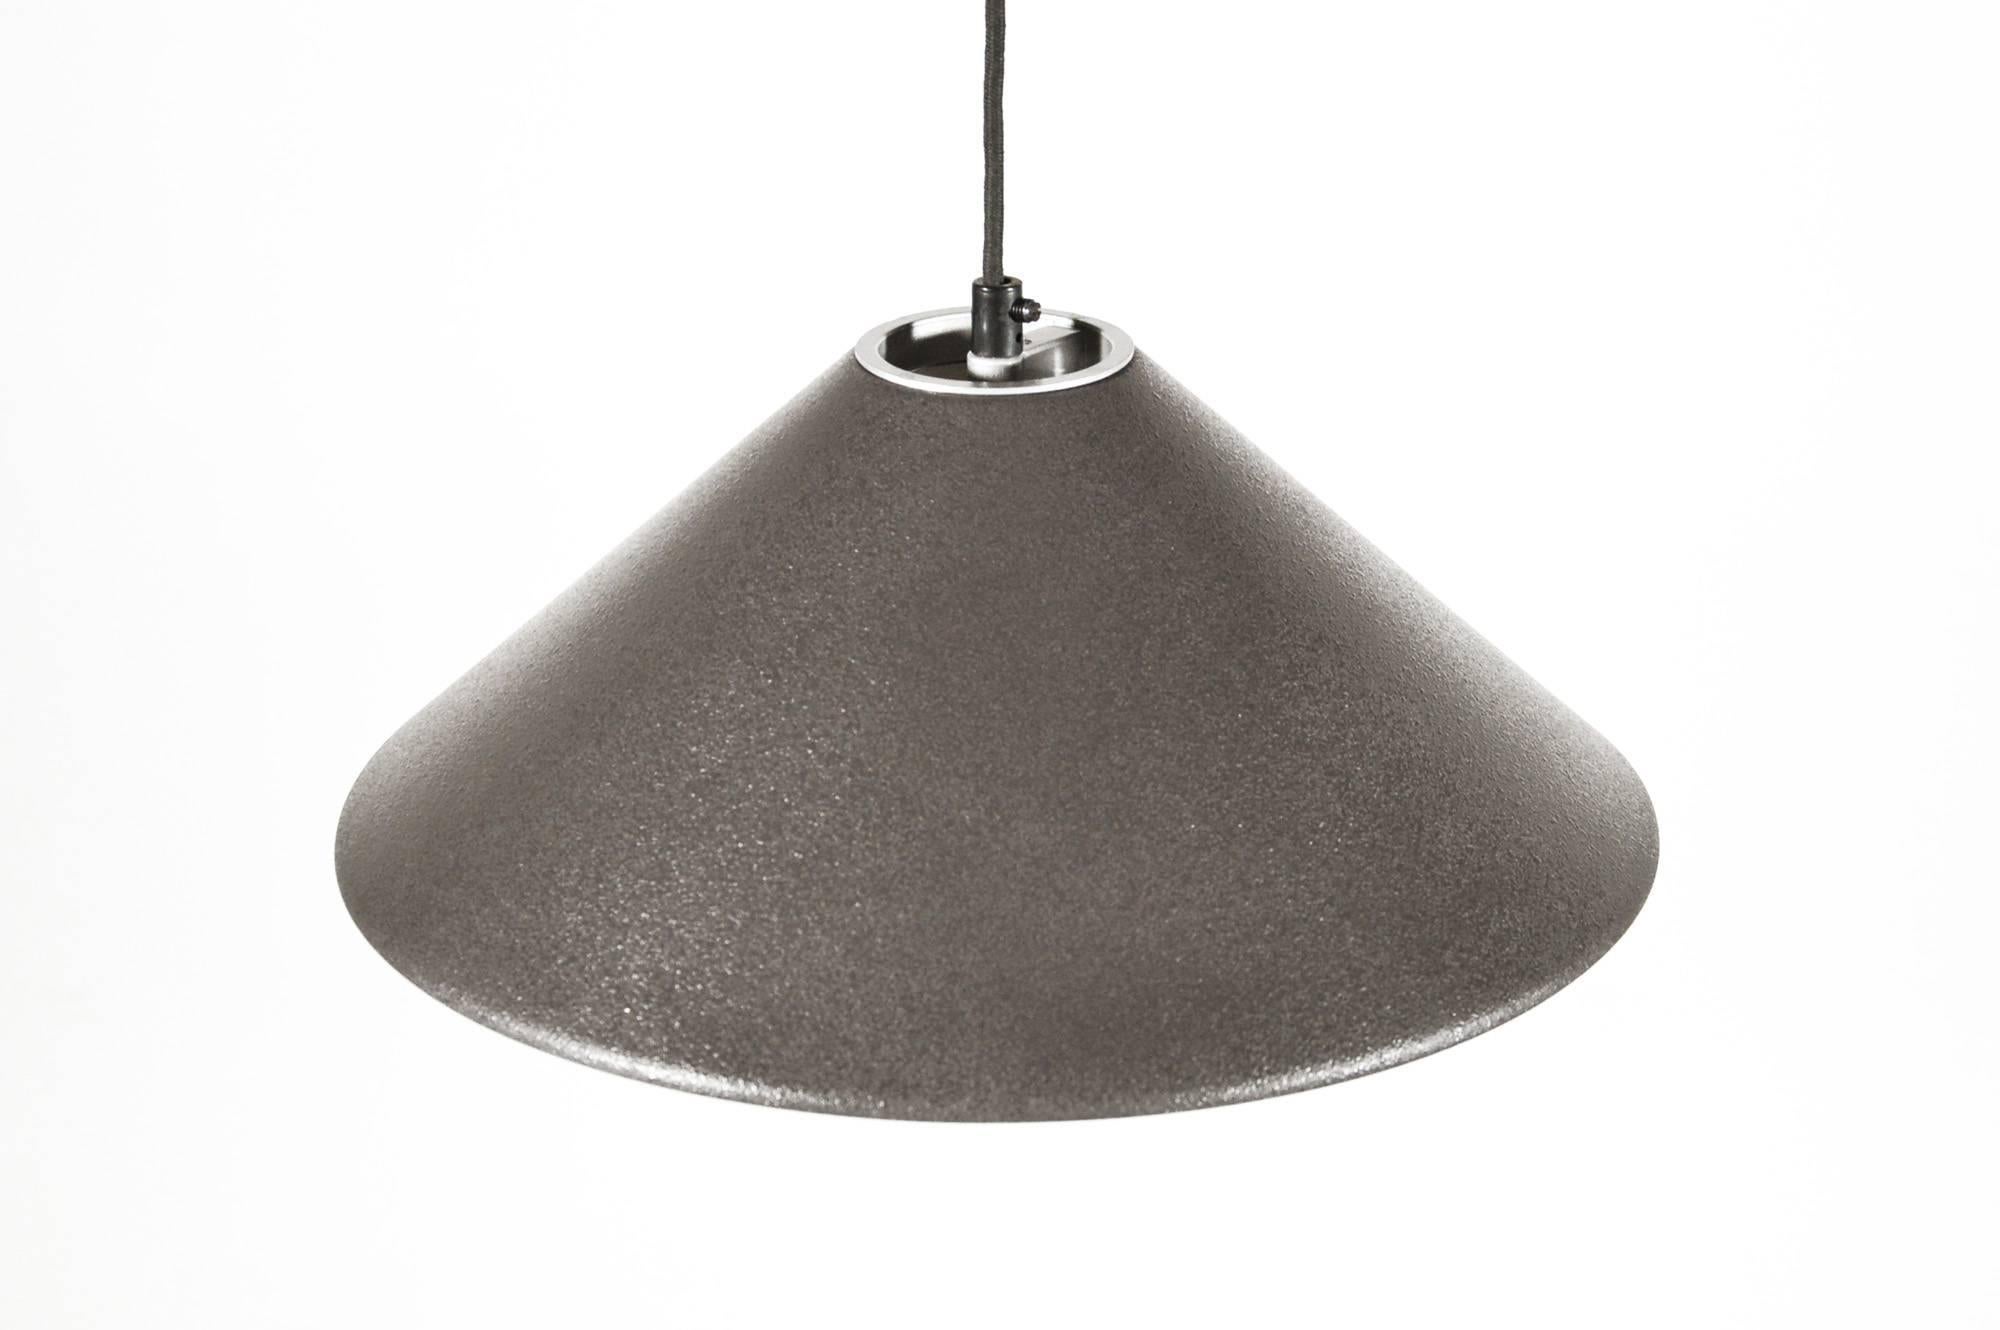 Aggregato Pendant lamp designed by Enzo Mari and Giancarlo Fassina for Artemide in 1976, with enameled metal conical shade, in dark warm grey.